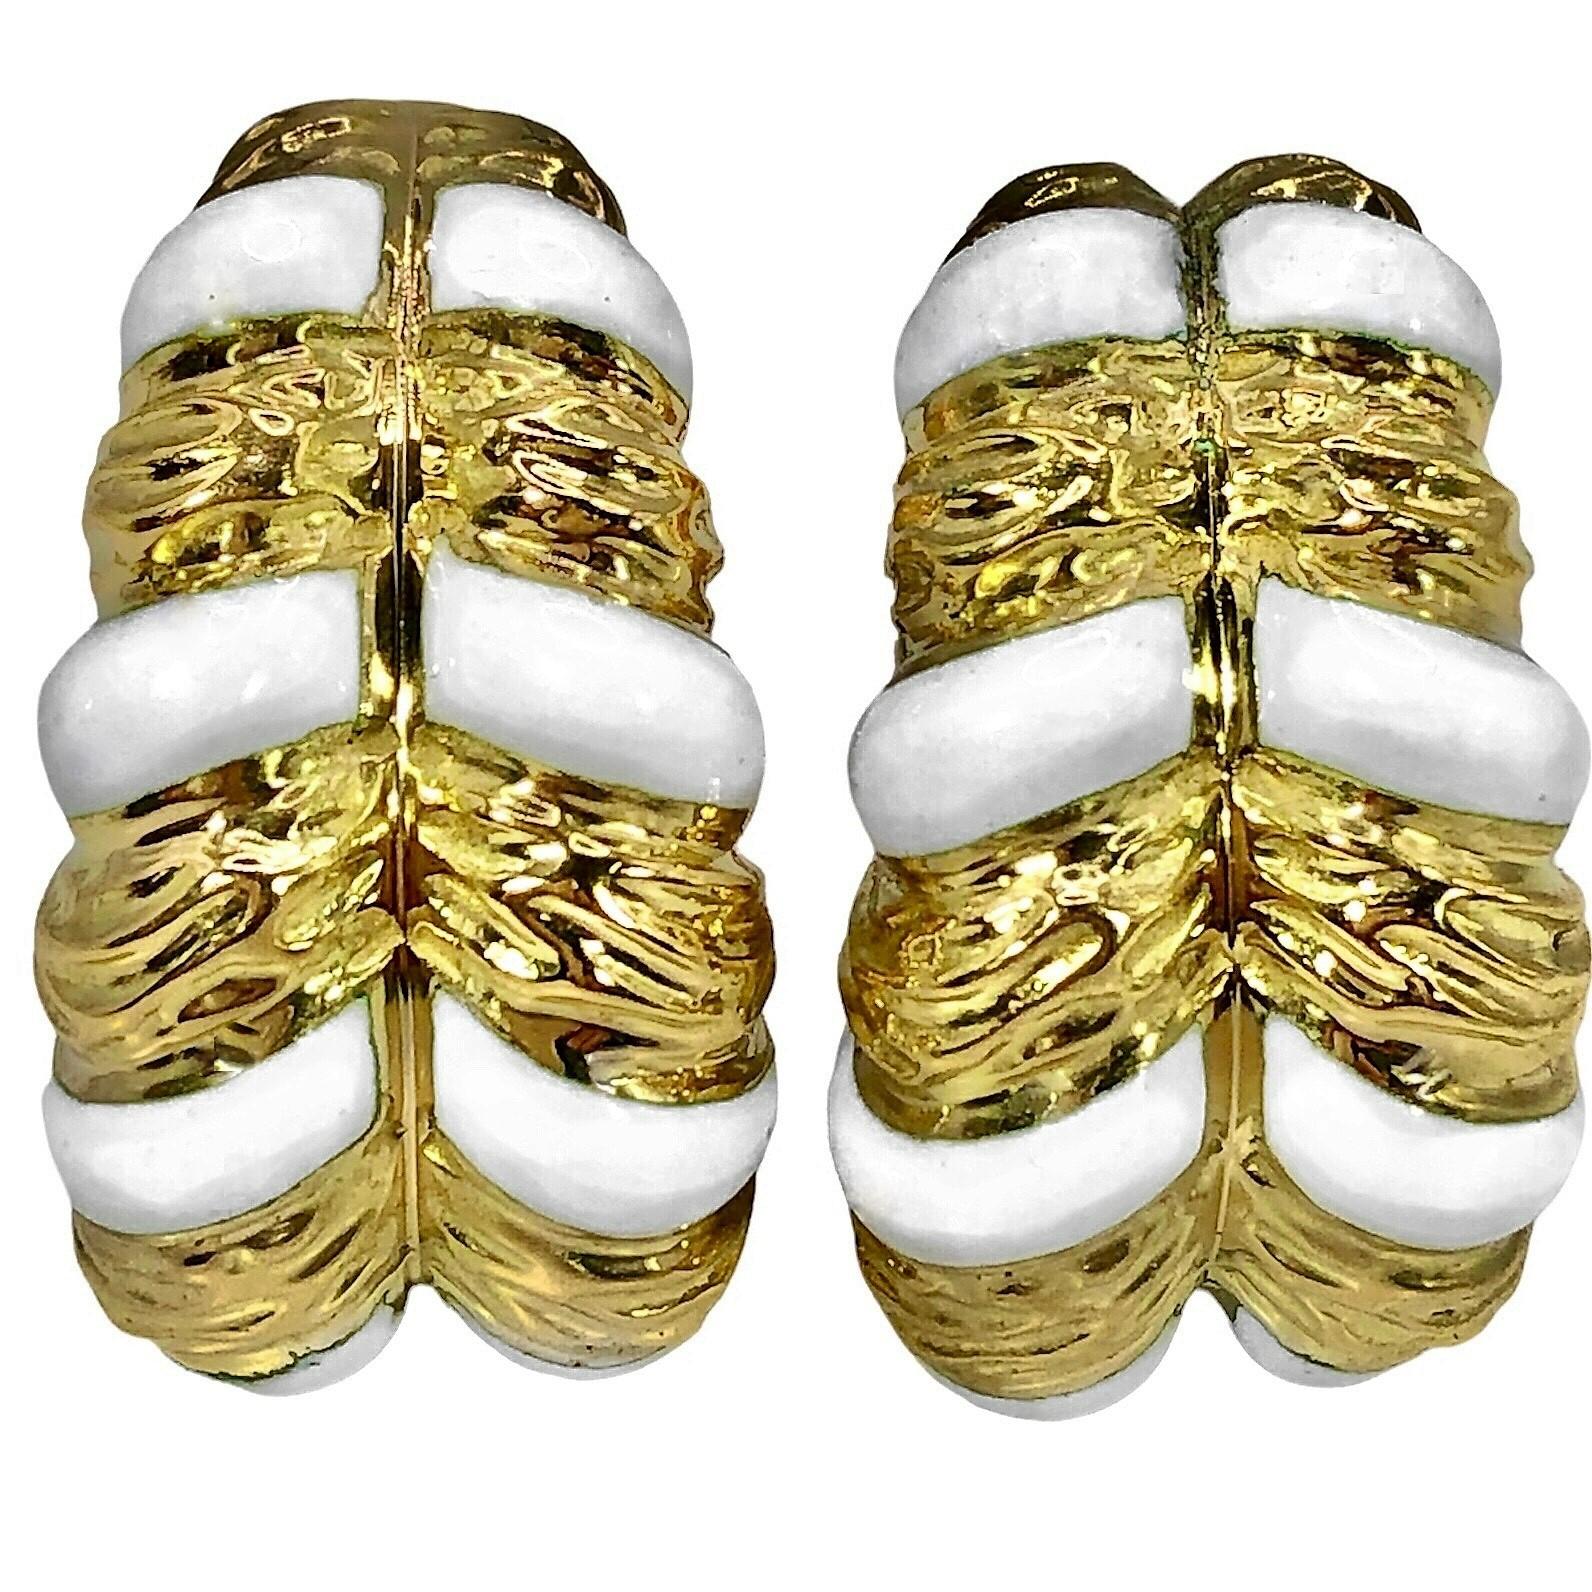 This striking pair of textured, 18k yellow gold David Webb earrings is punctuated with five rows of white enamel stripes. These comfortable to wear, 
medium size, half hoops measure 1  inch in length by approximately 5/8 inches at the widest point.